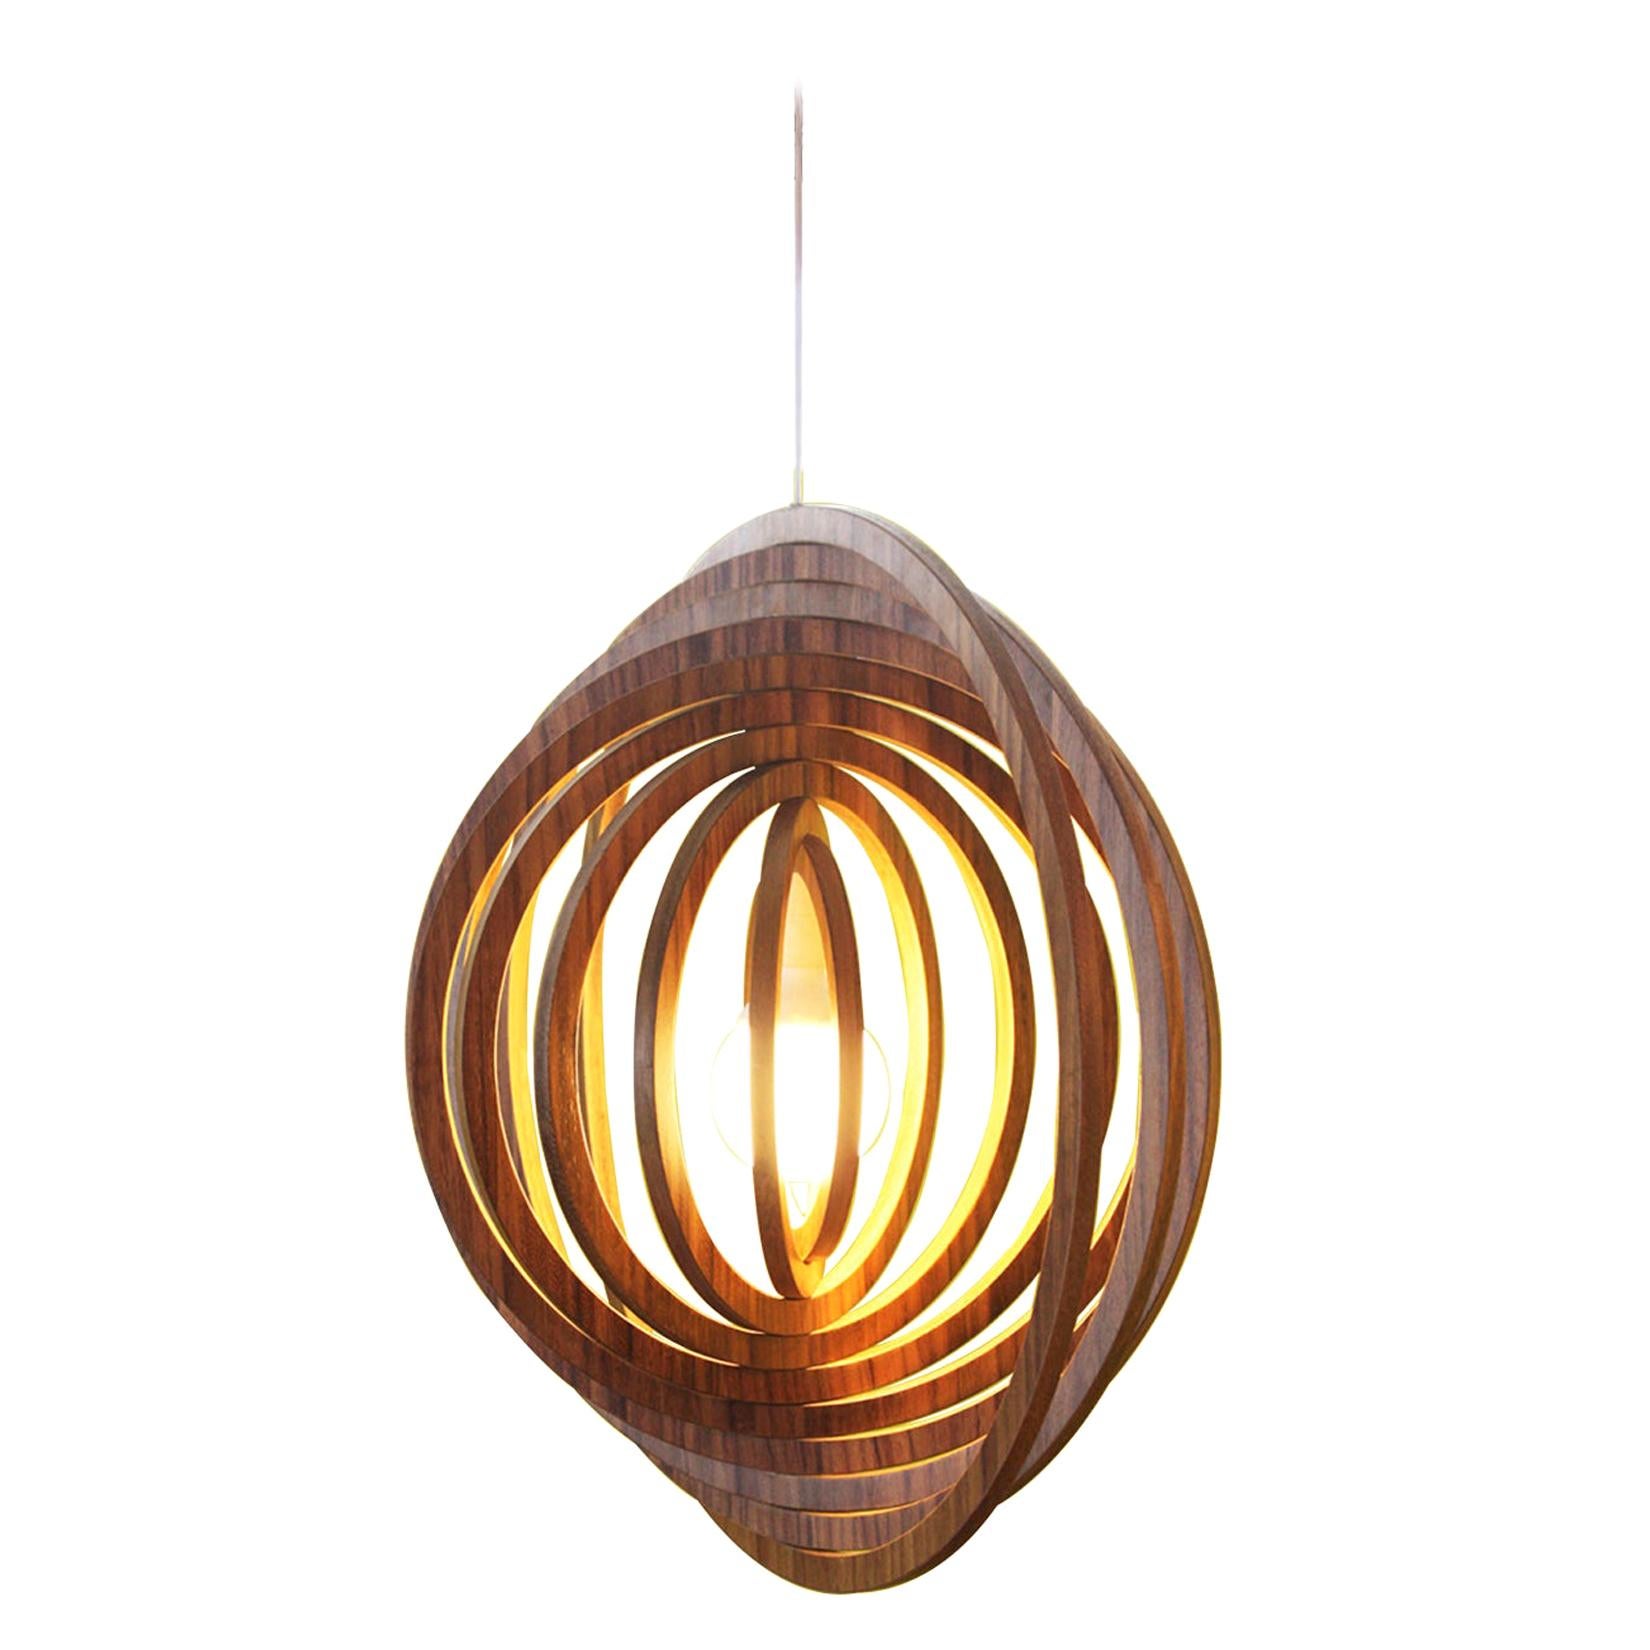 Plato Abajo 40 Pendant Lamp, Maria Beckmann, Represented by Tuleste Factory Sale at 1stDibs